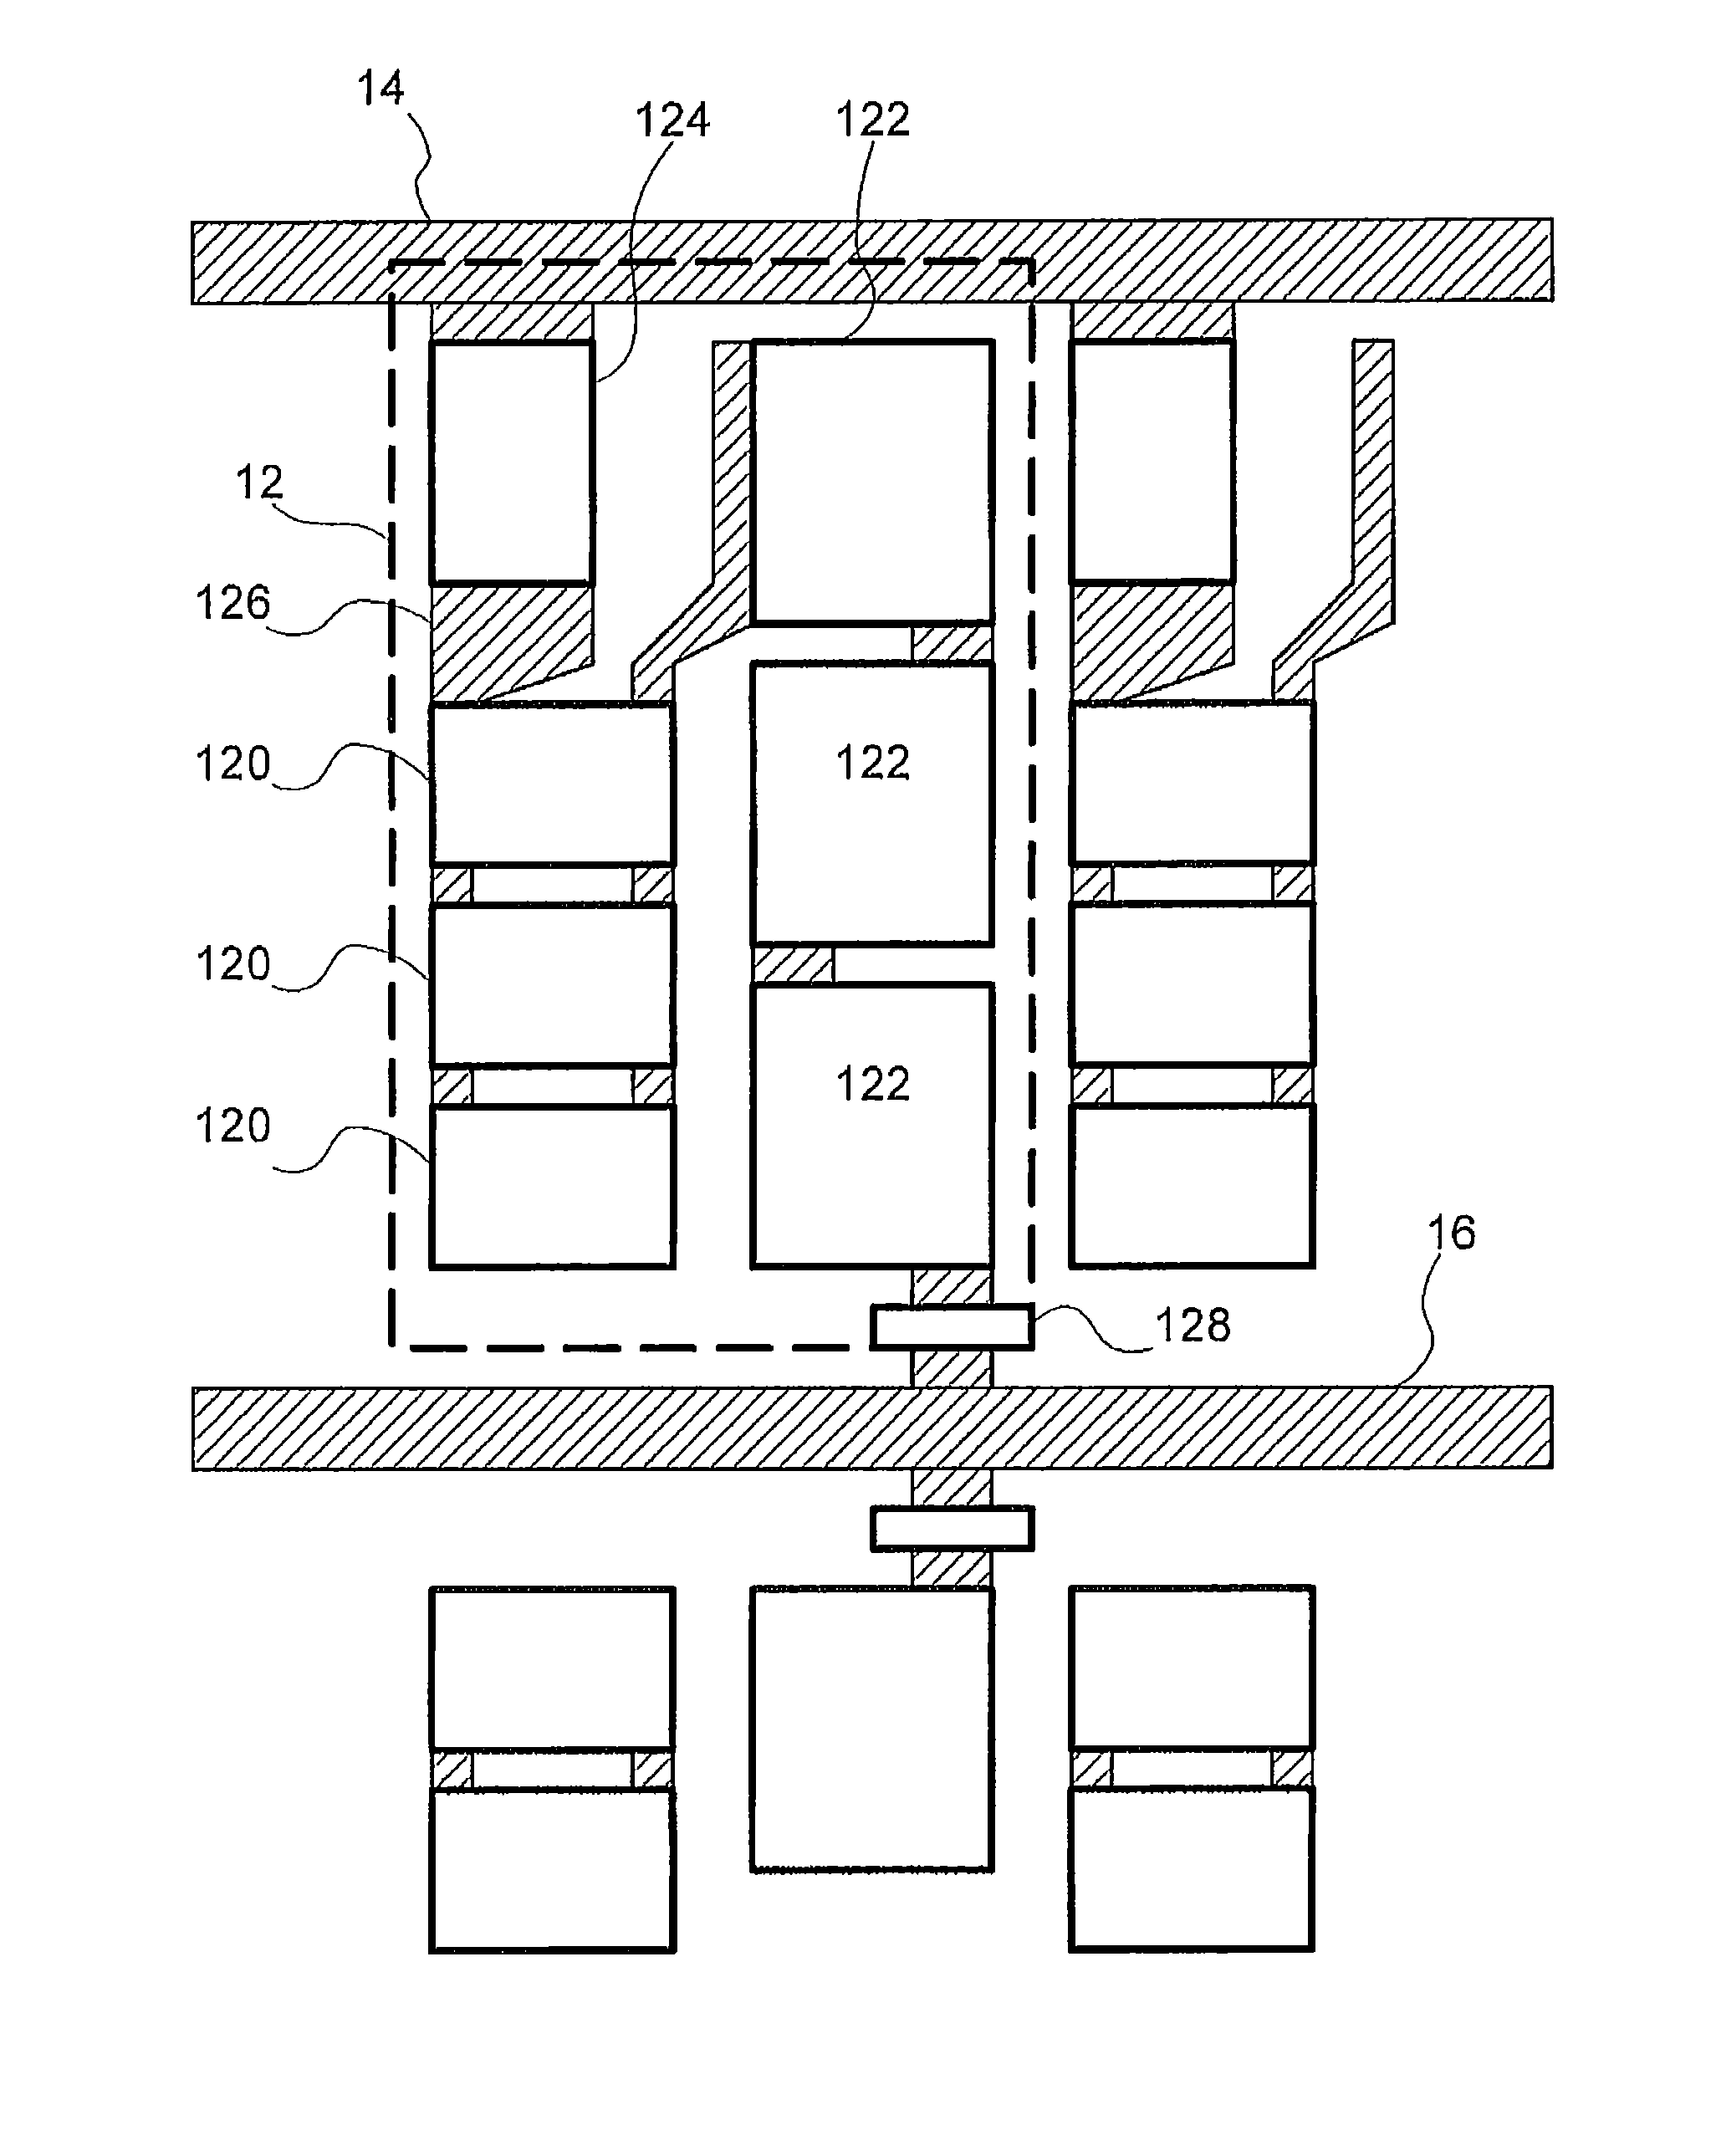 Intrinsically safe display device with an array of LEDs